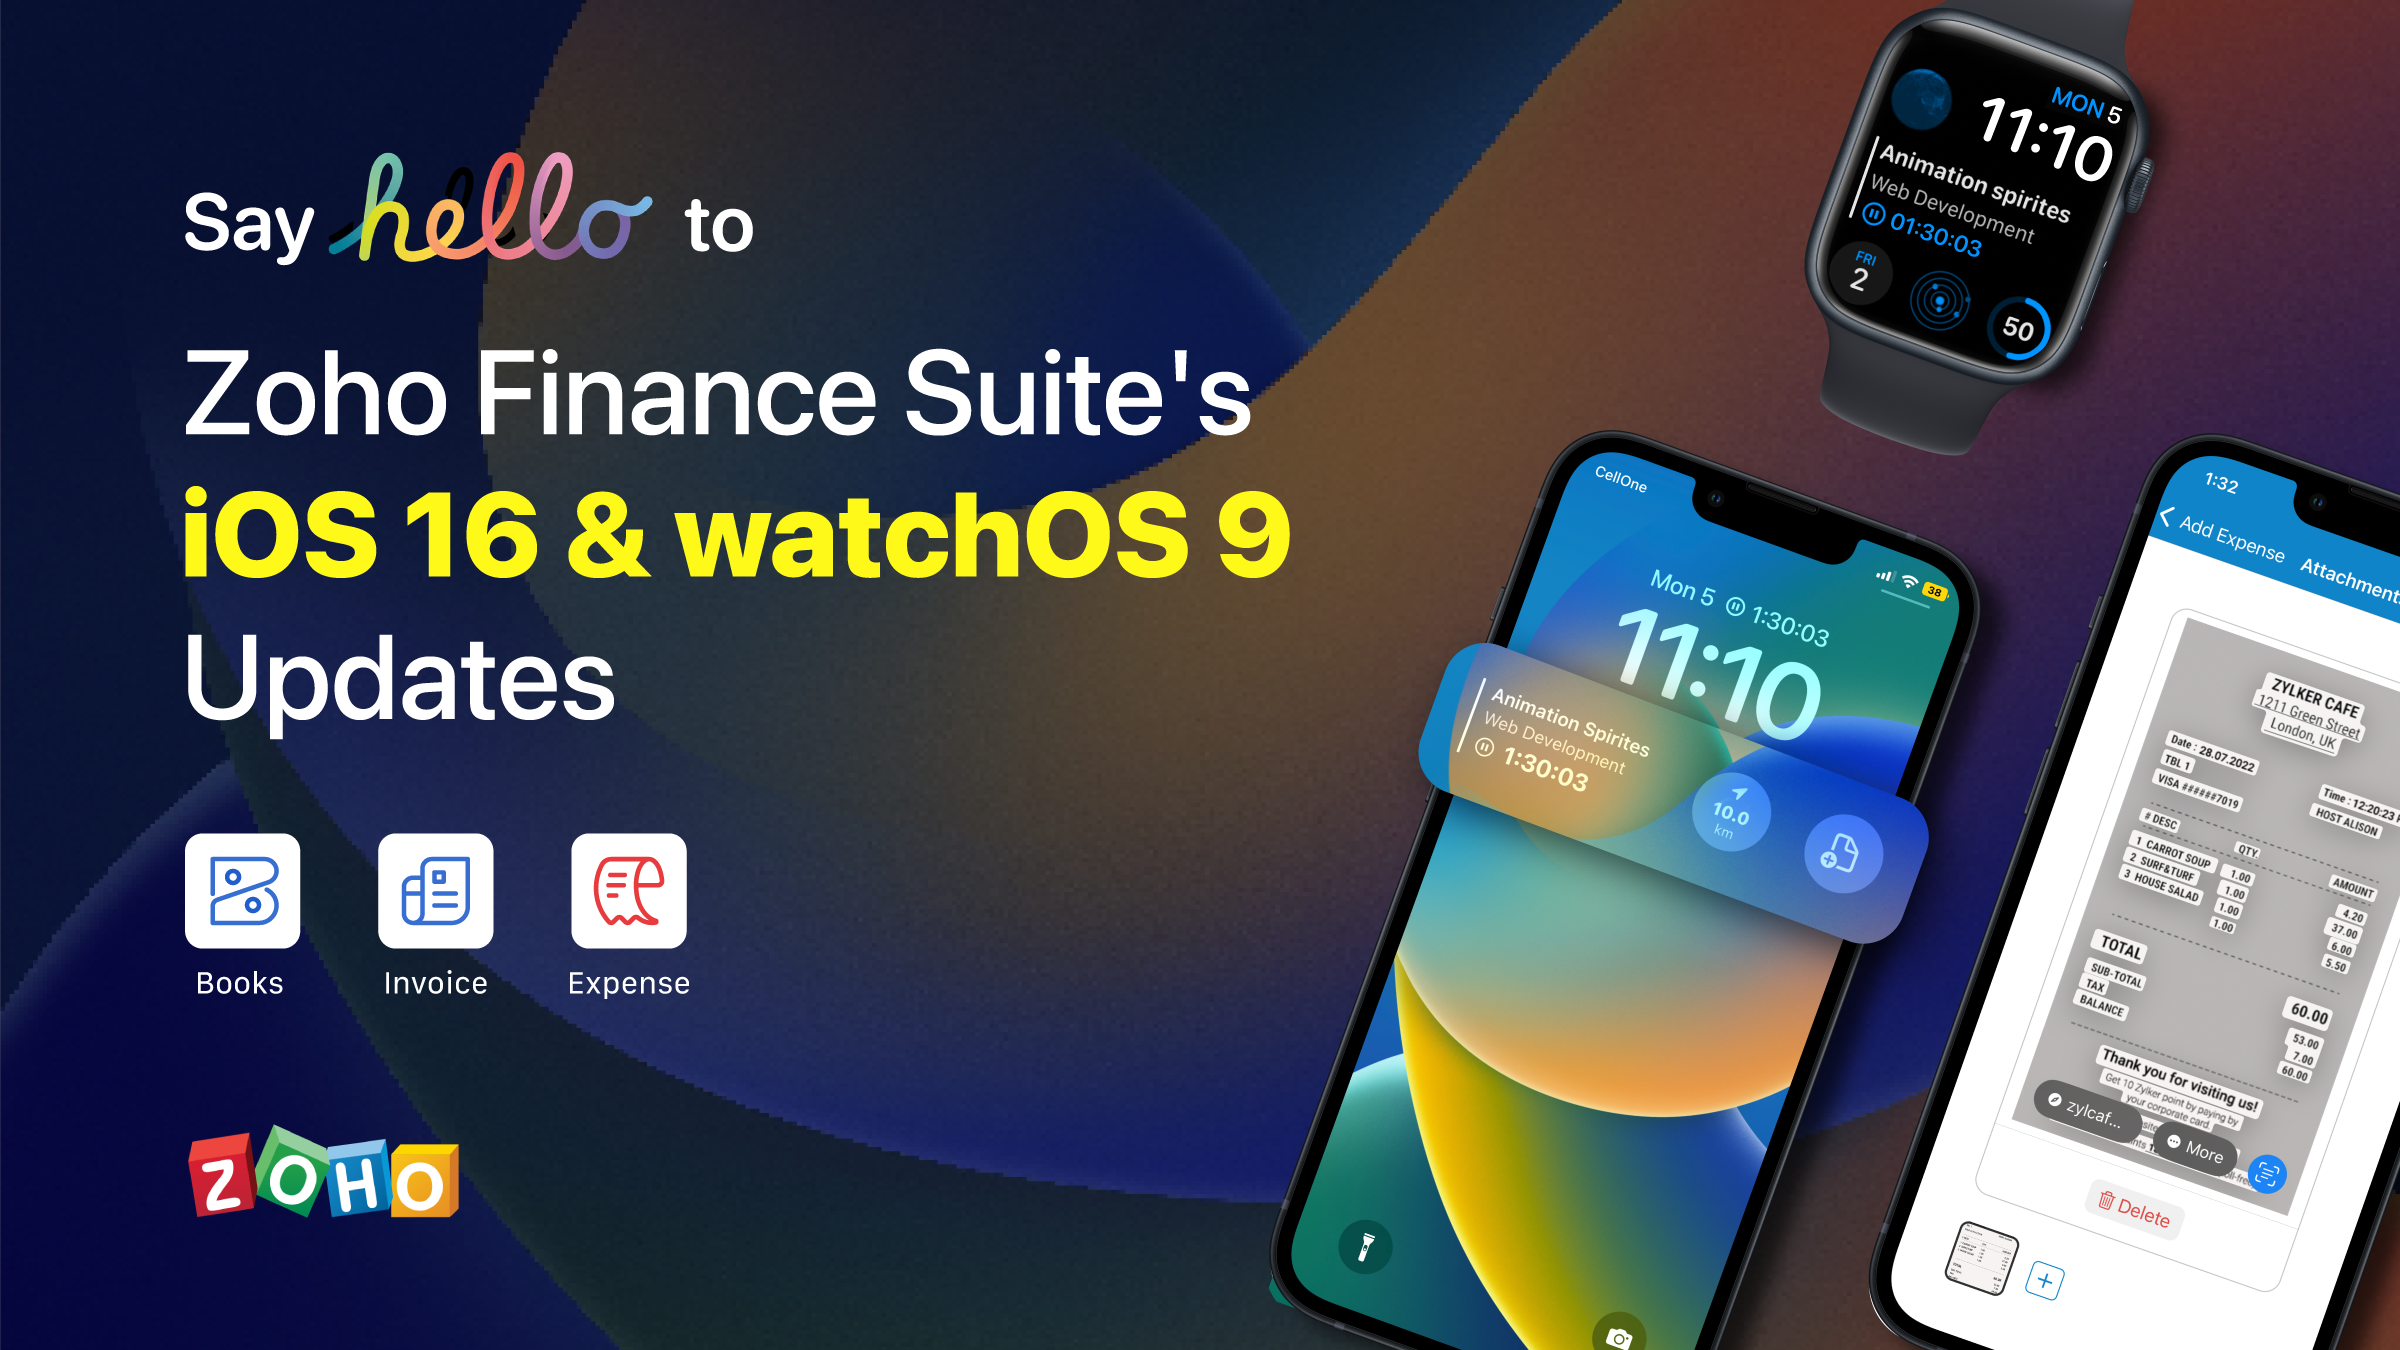 Everything You Need To Know About Zoho Finance Suite's iOS 16 and watchOS 9 Updates From WWDC 2022!